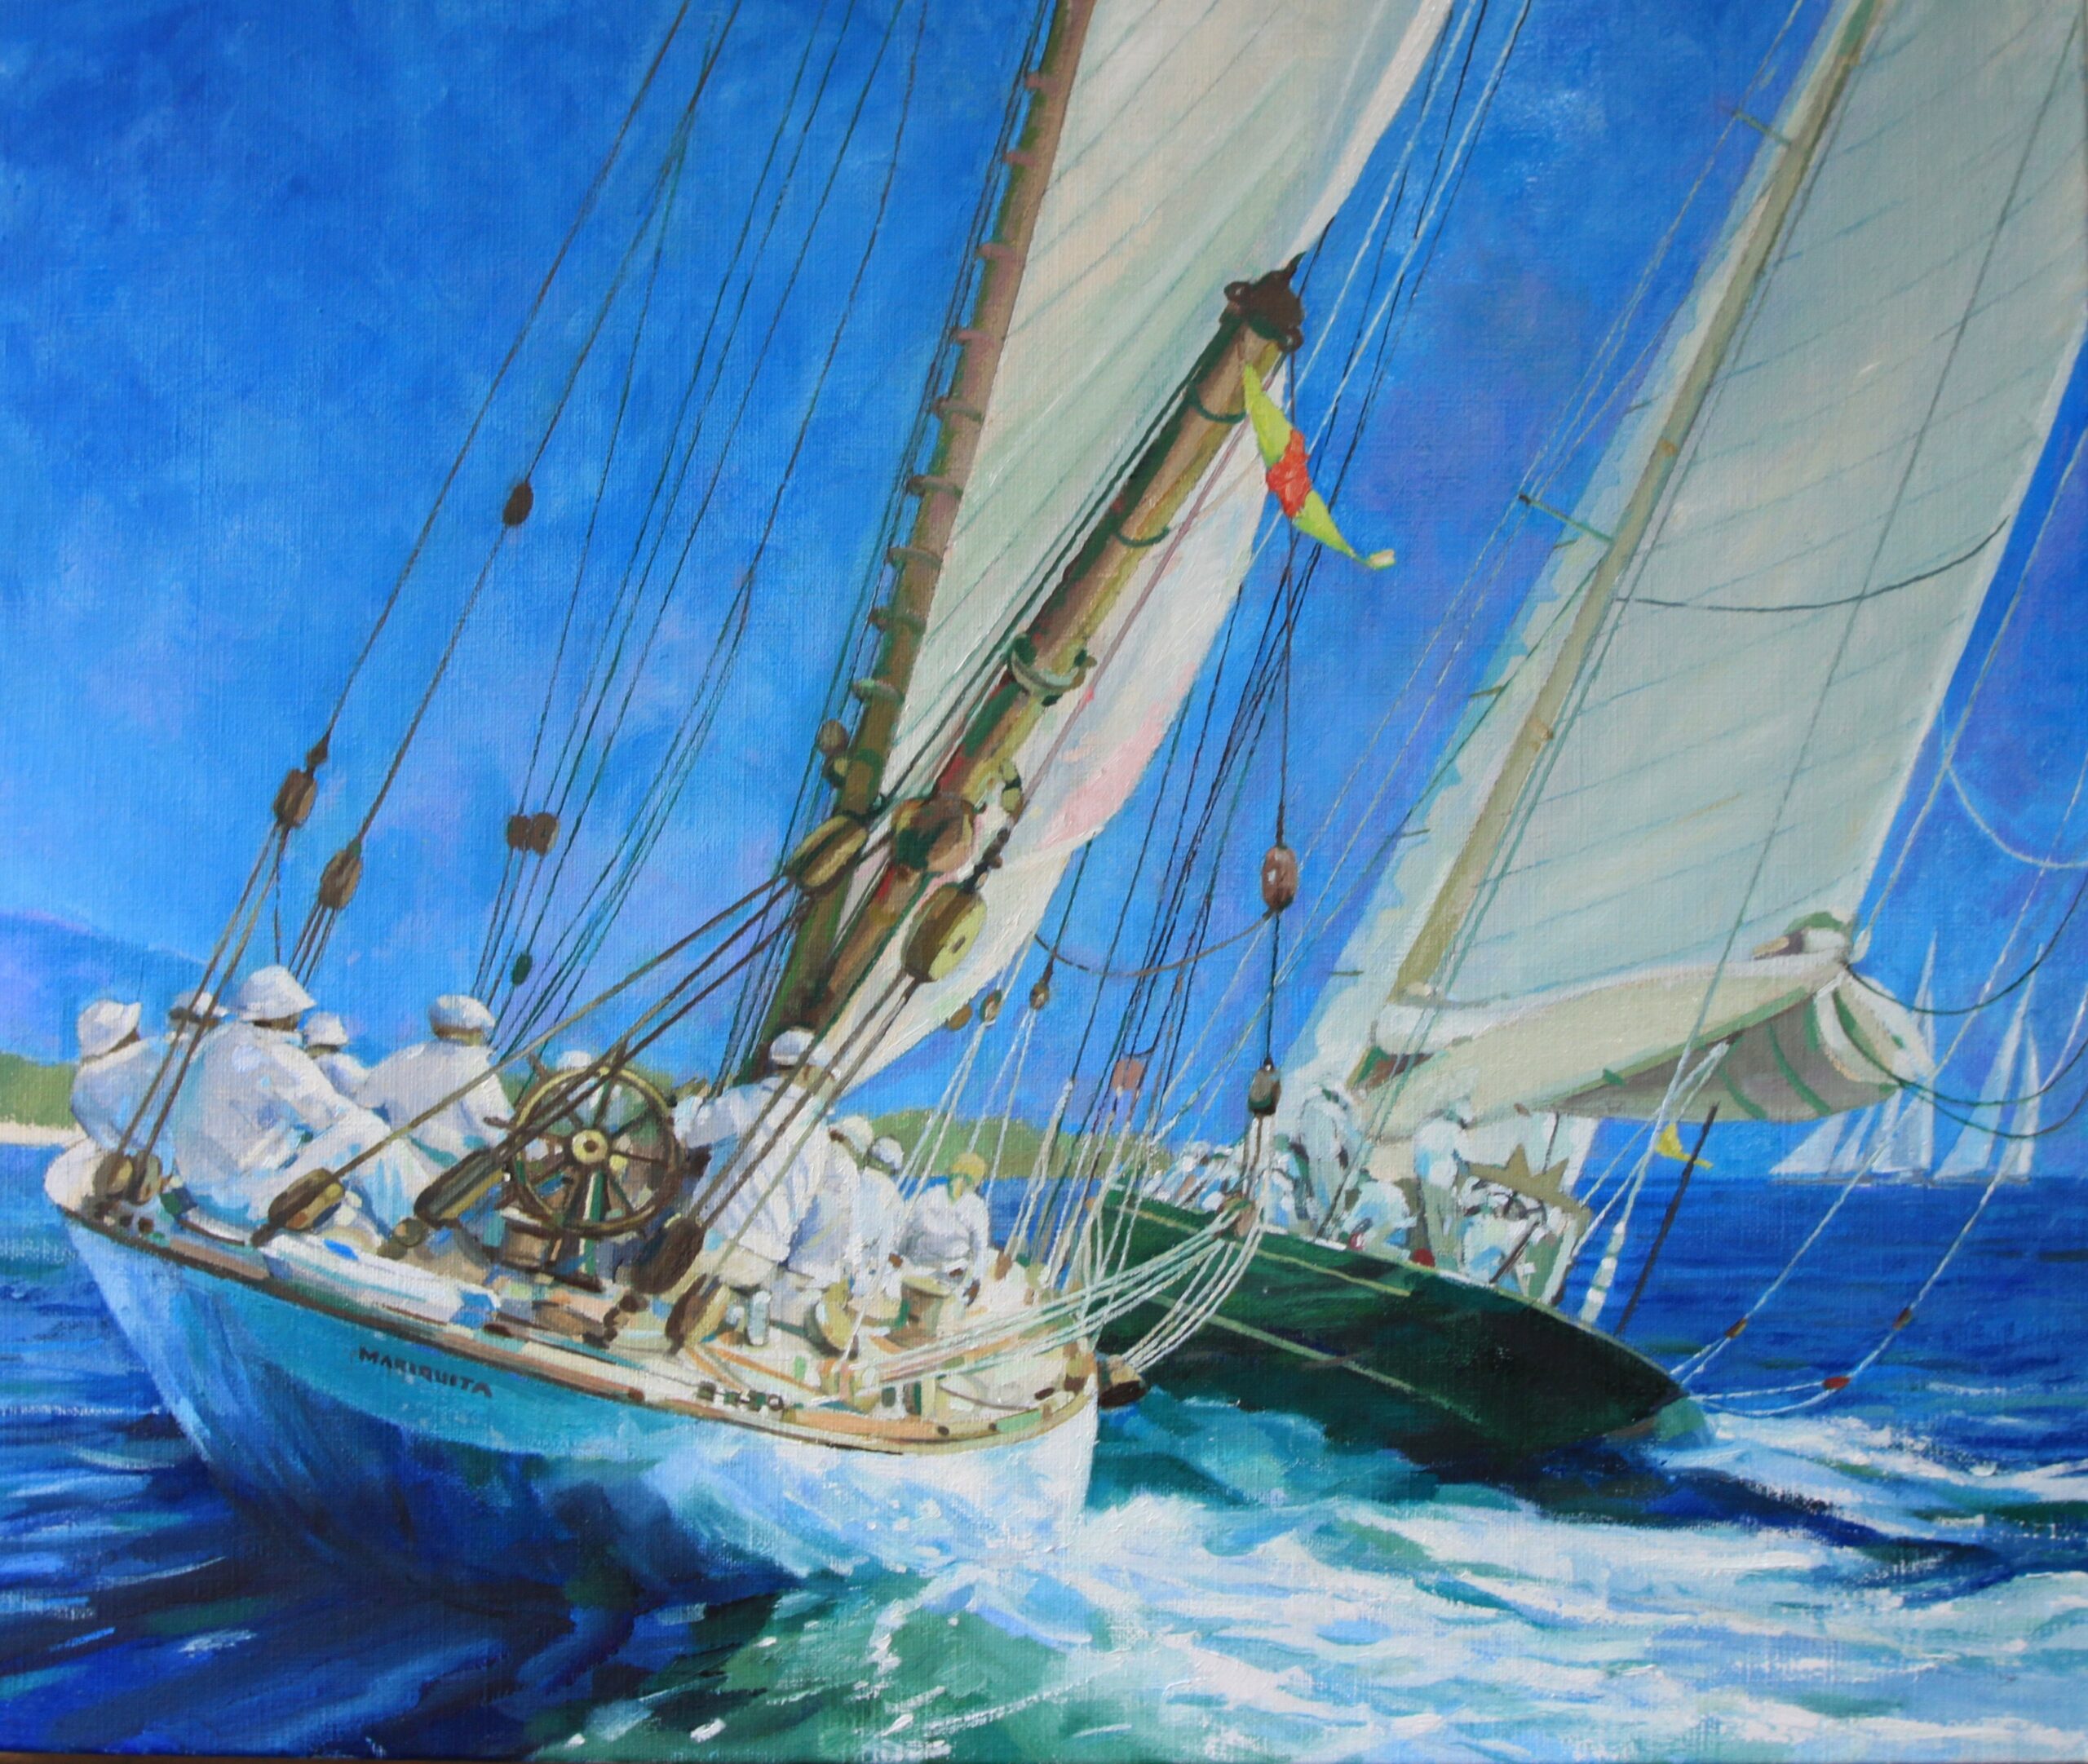 Painting of two yachts racing